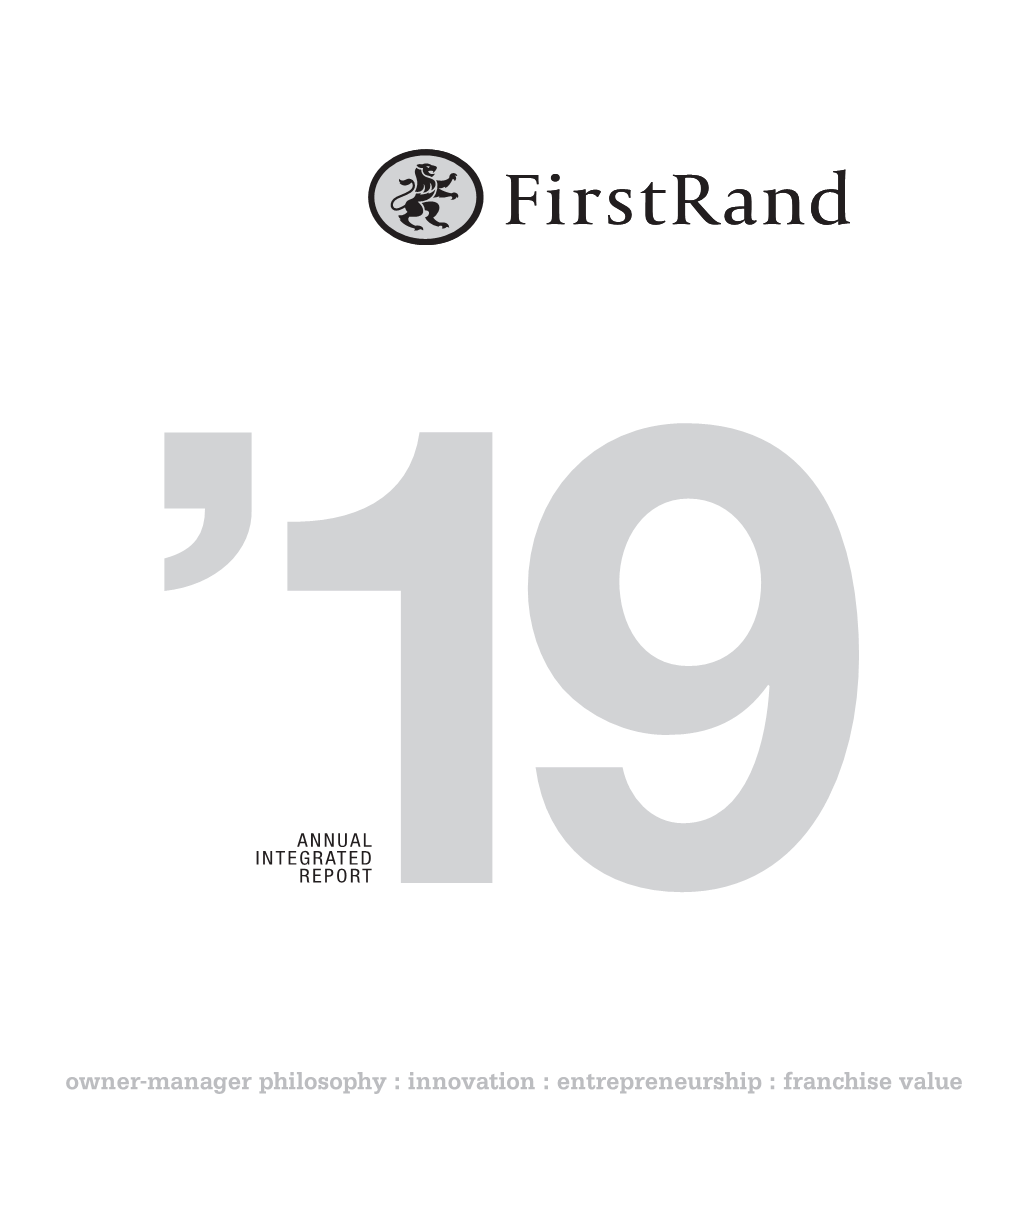 Firstrand Annual Integrated Report 2019